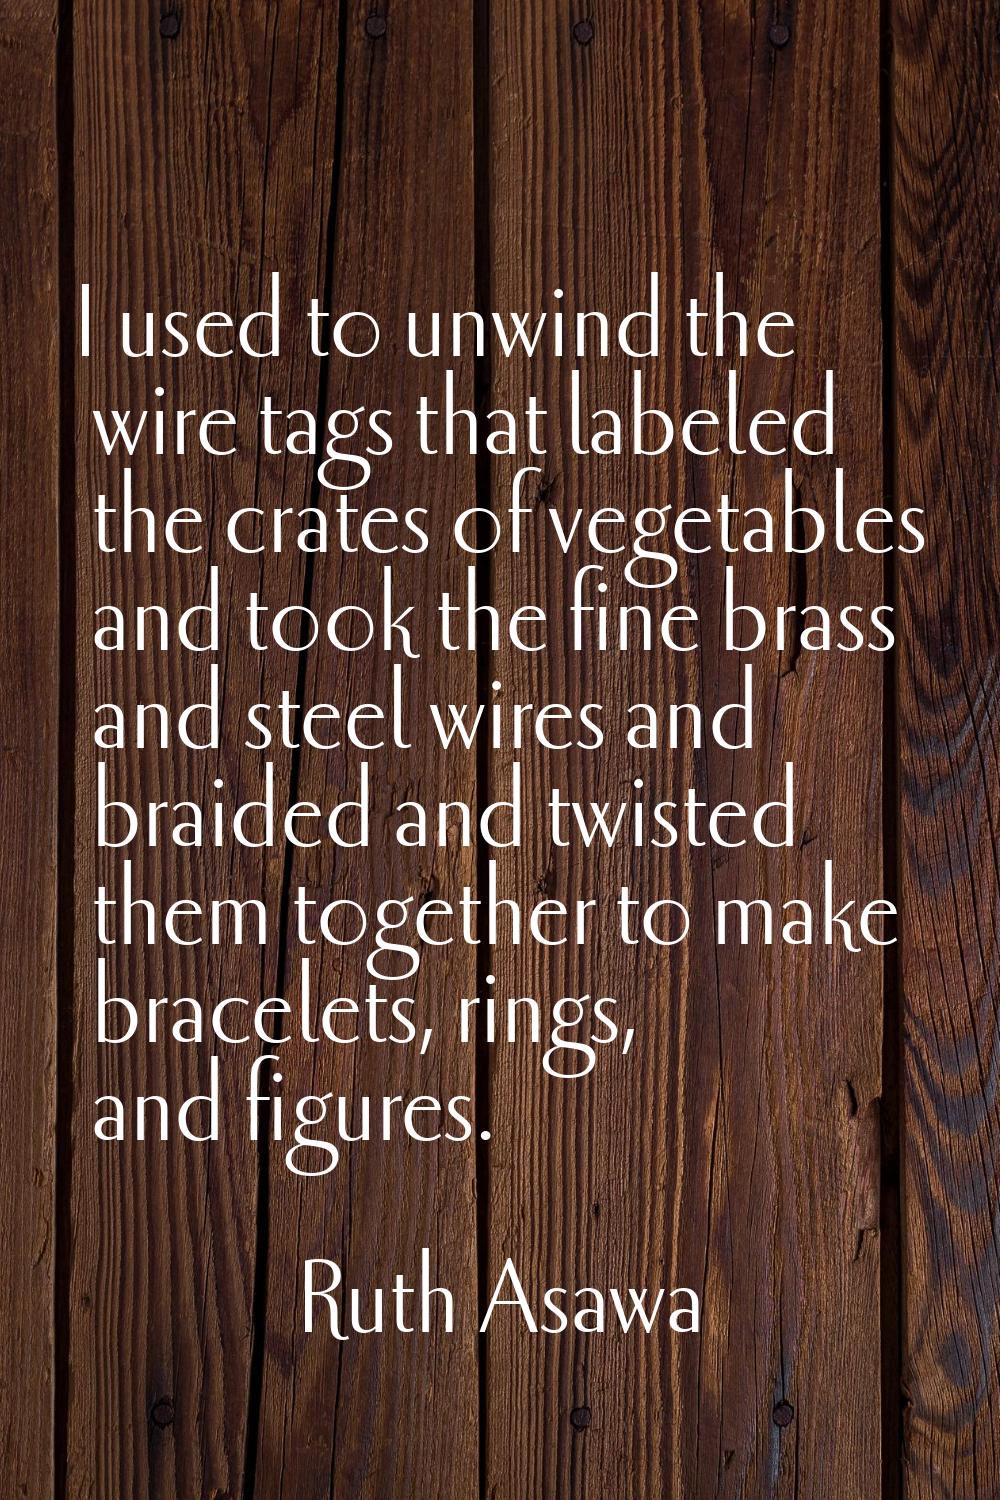 I used to unwind the wire tags that labeled the crates of vegetables and took the fine brass and st